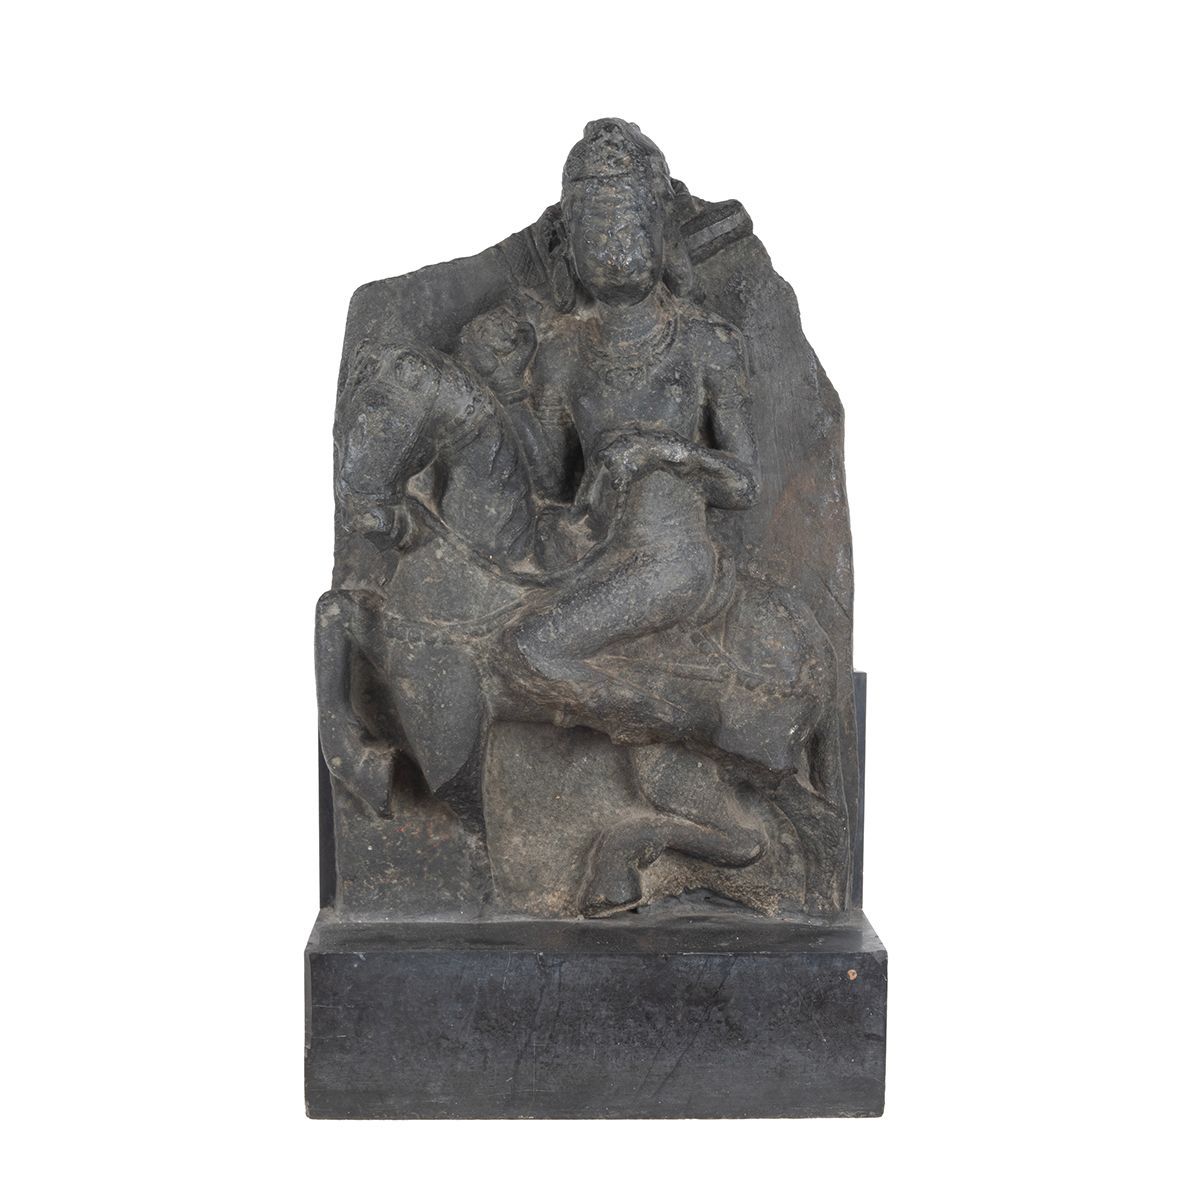 Vito Giallo Auction, 'Chapter I'
Monday, June 17th | 10 a.m.
Hindu Carved Stele Depicting a Buddhist Figure on a Horse.
Estimate: $1/$1,500
#michaansauctions #auctions #michaans #galleryauction #asianart #hinduart #indianart #stele #buddhistart #buddistfigure #indianstele